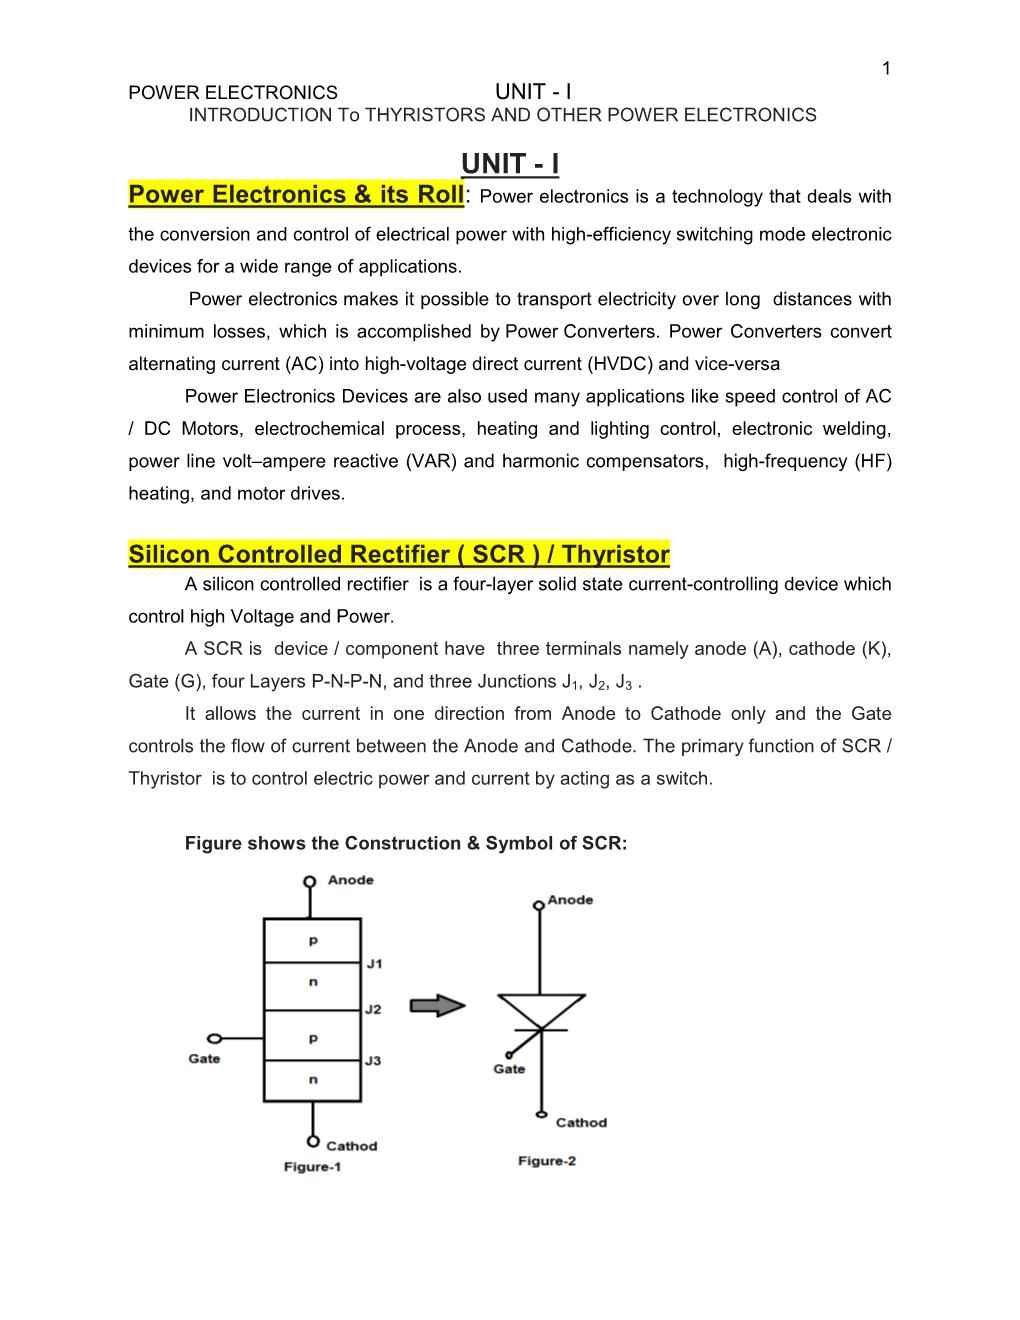 UNIT - I INTRODUCTION to THYRISTORS and OTHER POWER ELECTRONICS